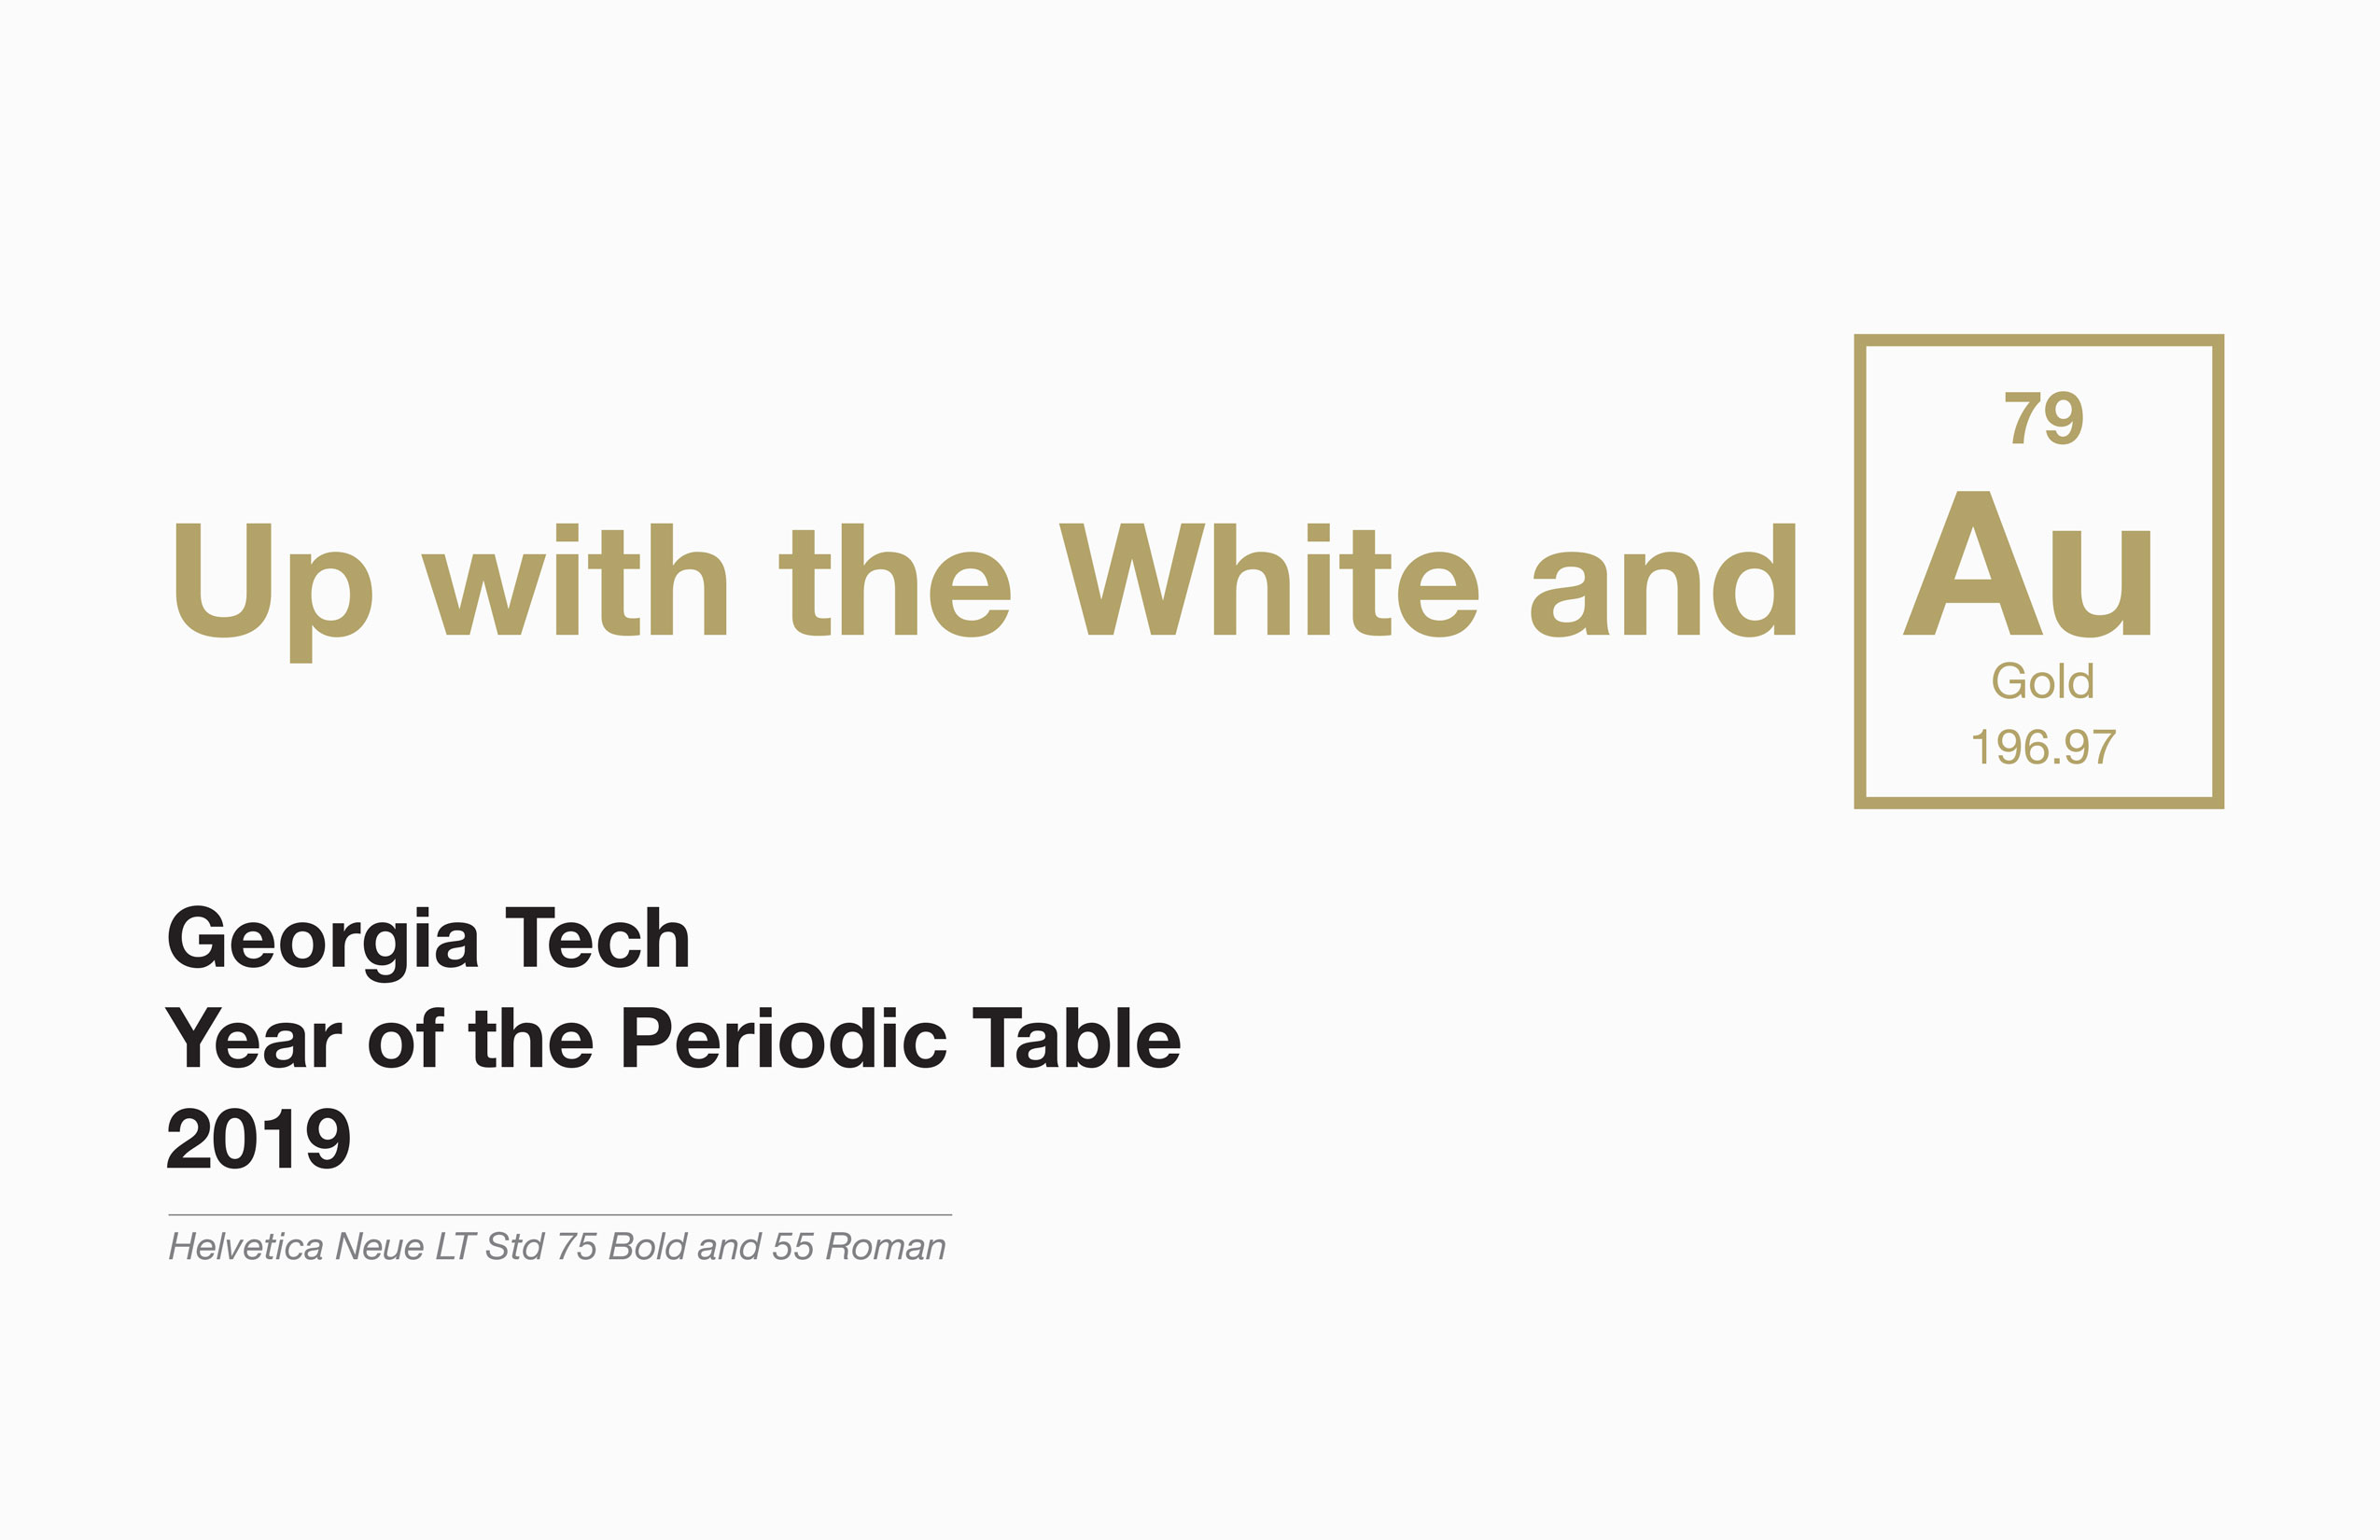 Logo reads "Up with the White and A.U.," a play on the nickname for the Georgia Tech team, "The White and Gold"